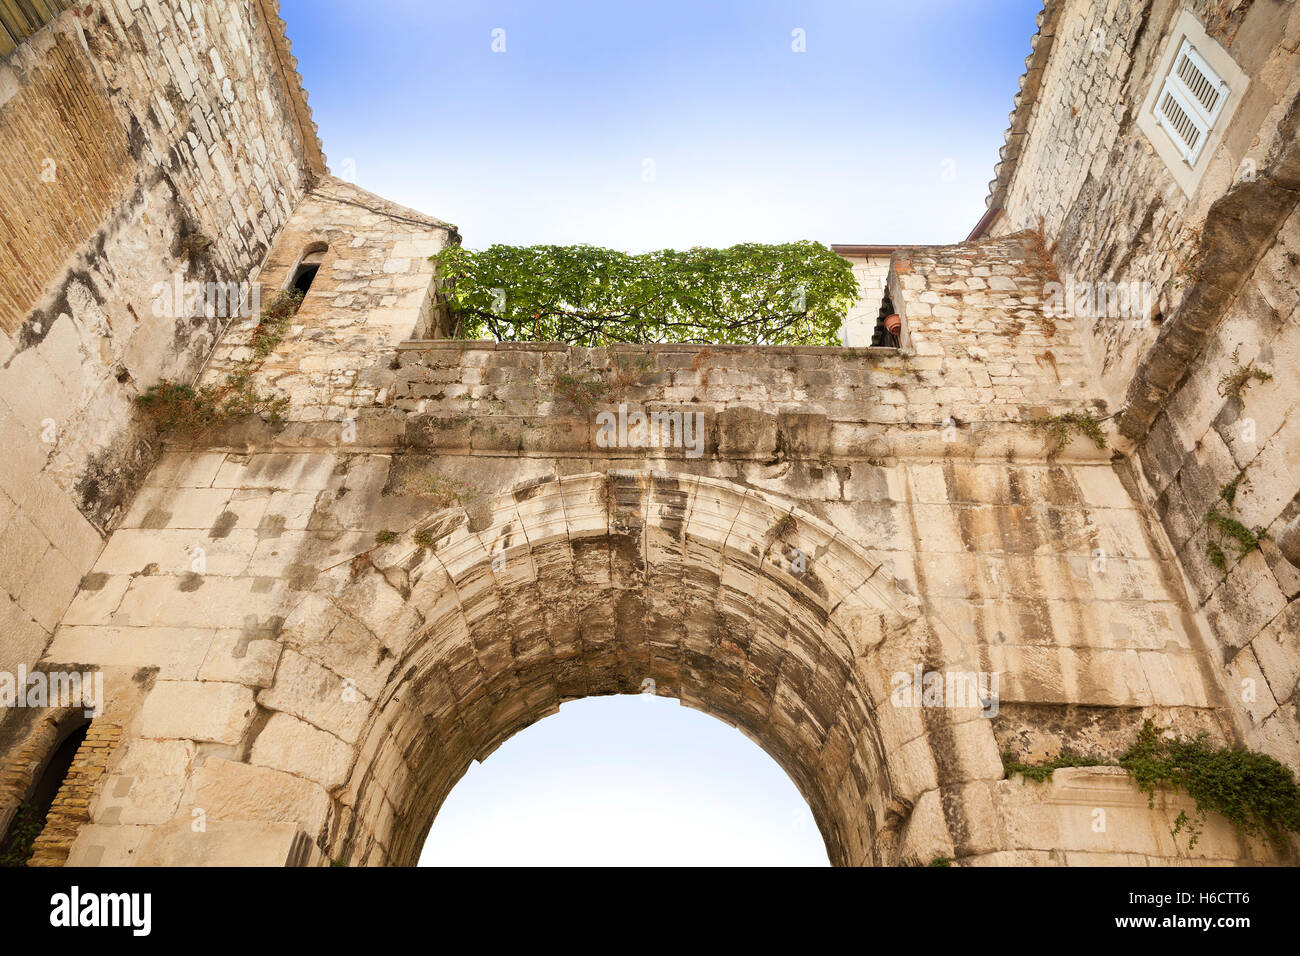 Inside the arched Northern entrance, the Roman Diocletian's Palace, Split, Croatia. Architectural detail Stock Photo